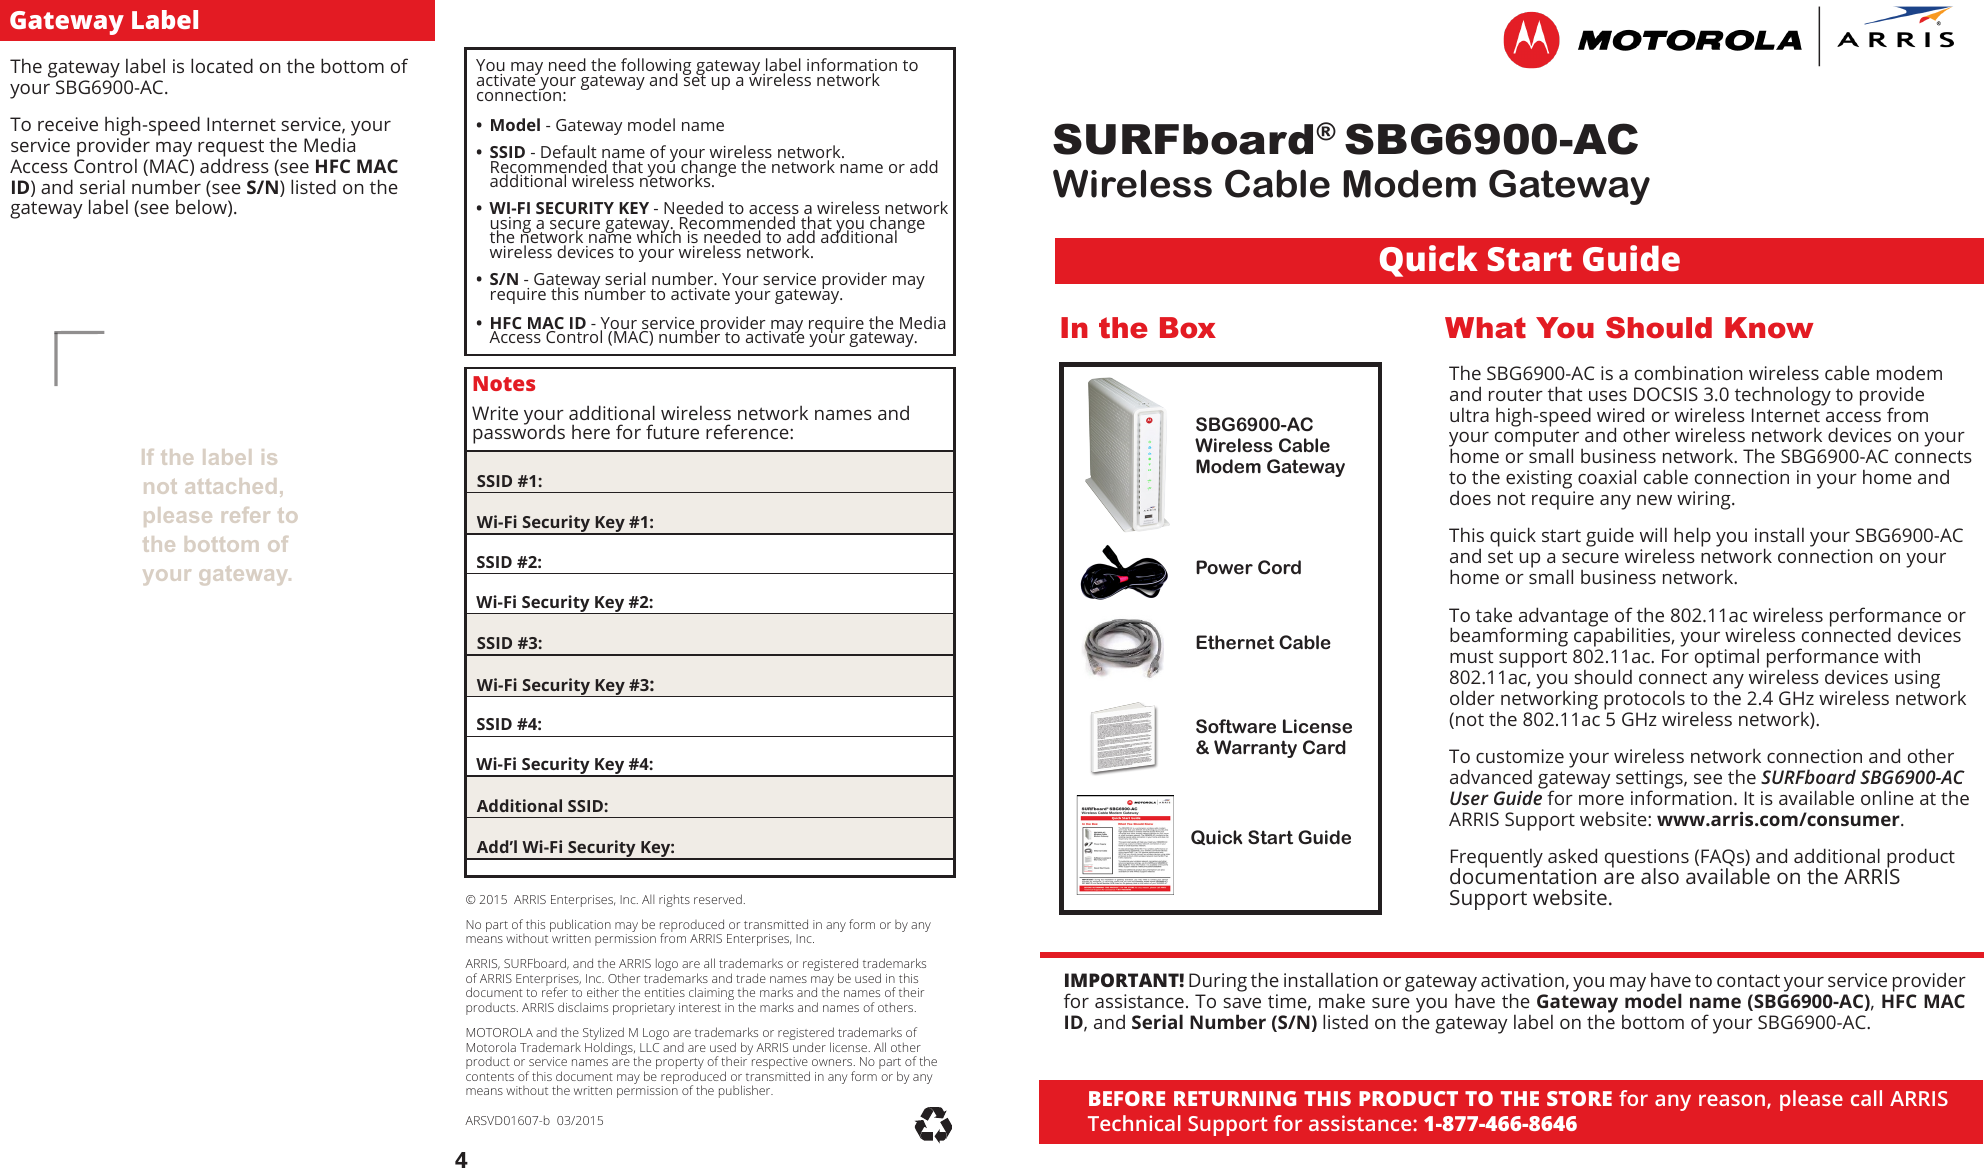 SURFboard® SBG6900-ACWireless Cable Modem Gateway© 2015  ARRIS Enterprises, Inc. All rights reserved.No part of this publication may be reproduced or transmitted in any form or by any means without written permission from ARRIS Enterprises, Inc.ARRIS, SURFboard, and the ARRIS logo are all trademarks or registered trademarks of ARRIS Enterprises, Inc. Other trademarks and trade names may be used in this document to refer to either the entities claiming the marks and the names of their products. ARRIS disclaims proprietary interest in the marks and names of others.MOTOROLA and the Stylized M Logo are trademarks or registered trademarks of Motorola Trademark Holdings, LLC and are used by ARRIS under license. All other product or service names are the property of their respective owners. No part of the contents of this document may be reproduced or transmitted in any form or by any means without the written permission of the publisher.ARSVD01607-b  03/2015  If the label is not attached, please refer to the bottom of your gateway.4BEFORE RETURNING THIS PRODUCT TO THE STORE for any reason, please call ARRIS Technical Support for assistance: 1-877-466-8646The gateway label is located on the bottom of your SBG6900-AC.  To receive high-speed Internet service, your service provider may request the Media Access Control (MAC) address (see HFC MAC ID) and serial number (see S/N) listed on the gateway label (see below). In the BoxSBG6900-AC Wireless Cable Modem GatewayPower CordEthernet CableSoftware License &amp; Warranty CardQuick Start GuideWhat You Should KnowThe SBG6900-AC is a combination wireless cable modem and router that uses DOCSIS 3.0 technology to provide ultra high-speed wired or wireless Internet access from your computer and other wireless network devices on your home or small business network. The SBG6900-AC connects to the existing coaxial cable connection in your home and does not require any new wiring. This quick start guide will help you install your SBG6900-AC and set up a secure wireless network connection on your home or small business network.  To take advantage of the 802.11ac wireless performance or beamforming capabilities, your wireless connected devices must support 802.11ac. For optimal performance with 802.11ac, you should connect any wireless devices using older networking protocols to the 2.4 GHz wireless network (not the 802.11ac 5 GHz wireless network).To customize your wireless network connection and other advanced gateway settings, see the SURFboard SBG6900-AC User Guide for more information. It is available online at the ARRIS Support website: www.arris.com/consumer. Frequently asked questions (FAQs) and additional product documentation are also available on the ARRIS Support website. NotesWrite your additional wireless network names and  passwords here for future reference:  SSID #1:  Wi-Fi Security Key #1:  SSID #2:  Wi-Fi Security Key #2:  SSID #3:  Wi-Fi Security Key #3:  SSID #4:  Wi-Fi Security Key #4:  Additional SSID:  Add’l Wi-Fi Security Key:You may need the following gateway label information to activate your gateway and set up a wireless network connection: • Model - Gateway model name • SSID - Default name of your wireless network. Recommended that you change the network name or add additional wireless networks. • WI-FI SECURITY KEY - Needed to access a wireless network using a secure gateway. Recommended that you change the network name which is needed to add additional wireless devices to your wireless network. • S/N - Gateway serial number. Your service provider may require this number to activate your gateway. • HFC MAC ID - Your service provider may require the Media Access Control (MAC) number to activate your gateway. Gateway LabelQuick Start GuideIMPORTANT! During the installation or gateway activation, you may have to contact your service provider for assistance. To save time, make sure you have the Gateway model name (SBG6900-AC), HFC MAC ID, and Serial Number (S/N) listed on the gateway label on the bottom of your SBG6900-AC.